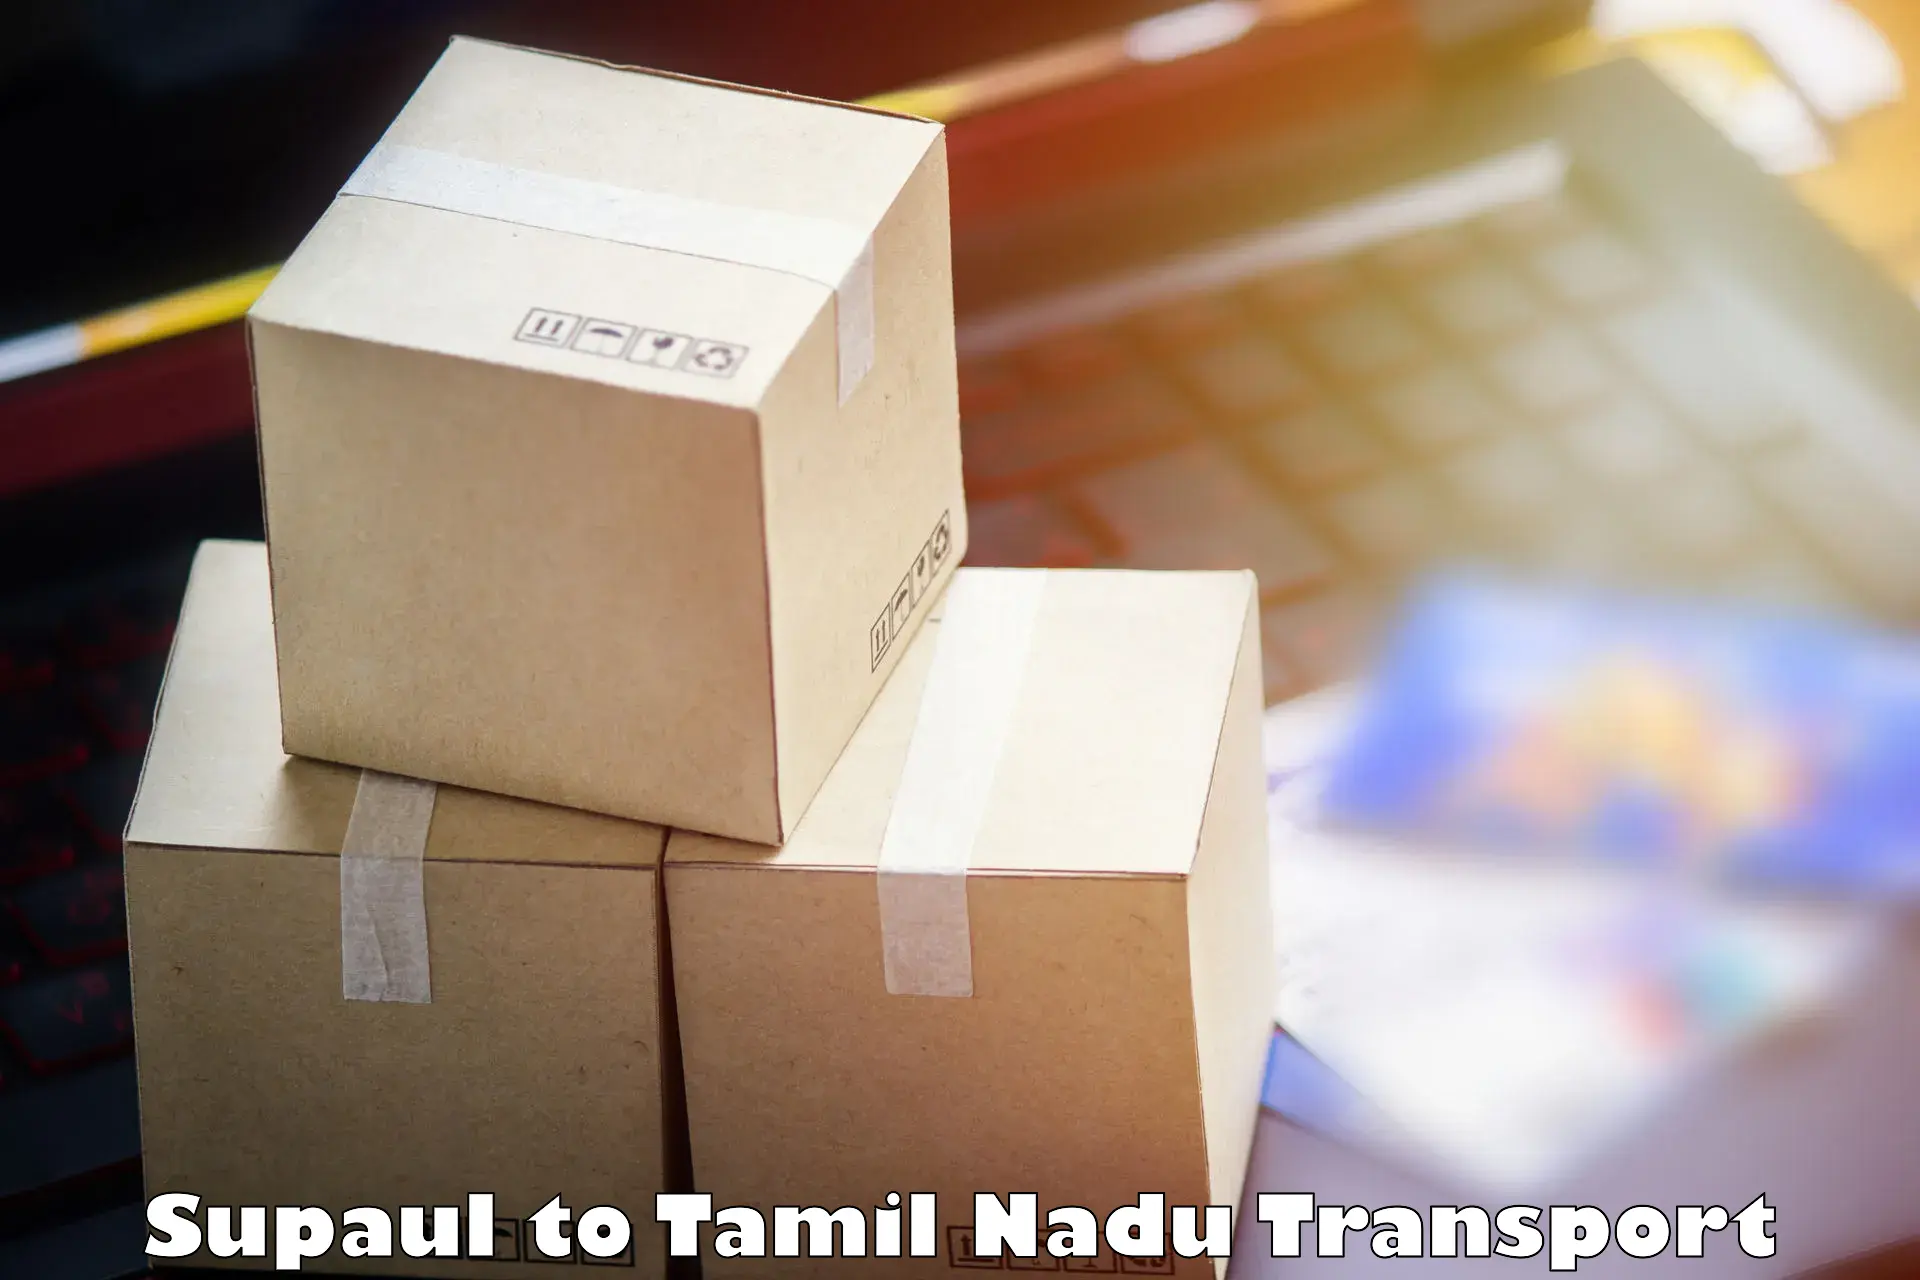 Commercial transport service Supaul to Tamil Nadu